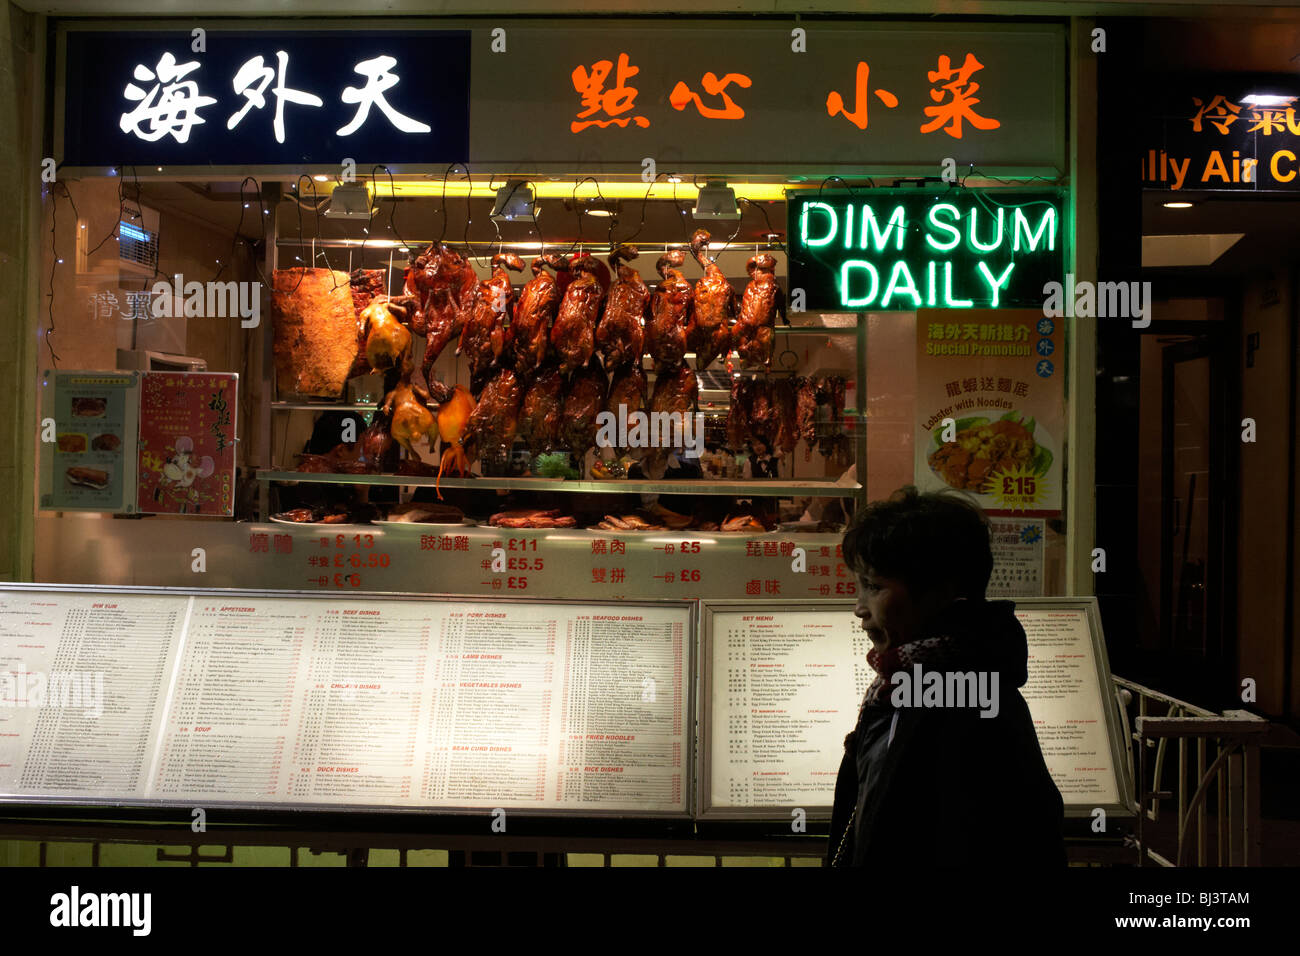 A passer-by stands next to a menu from a Chinese restaurant in Gerrard Street in London's Chinatown Stock Photo